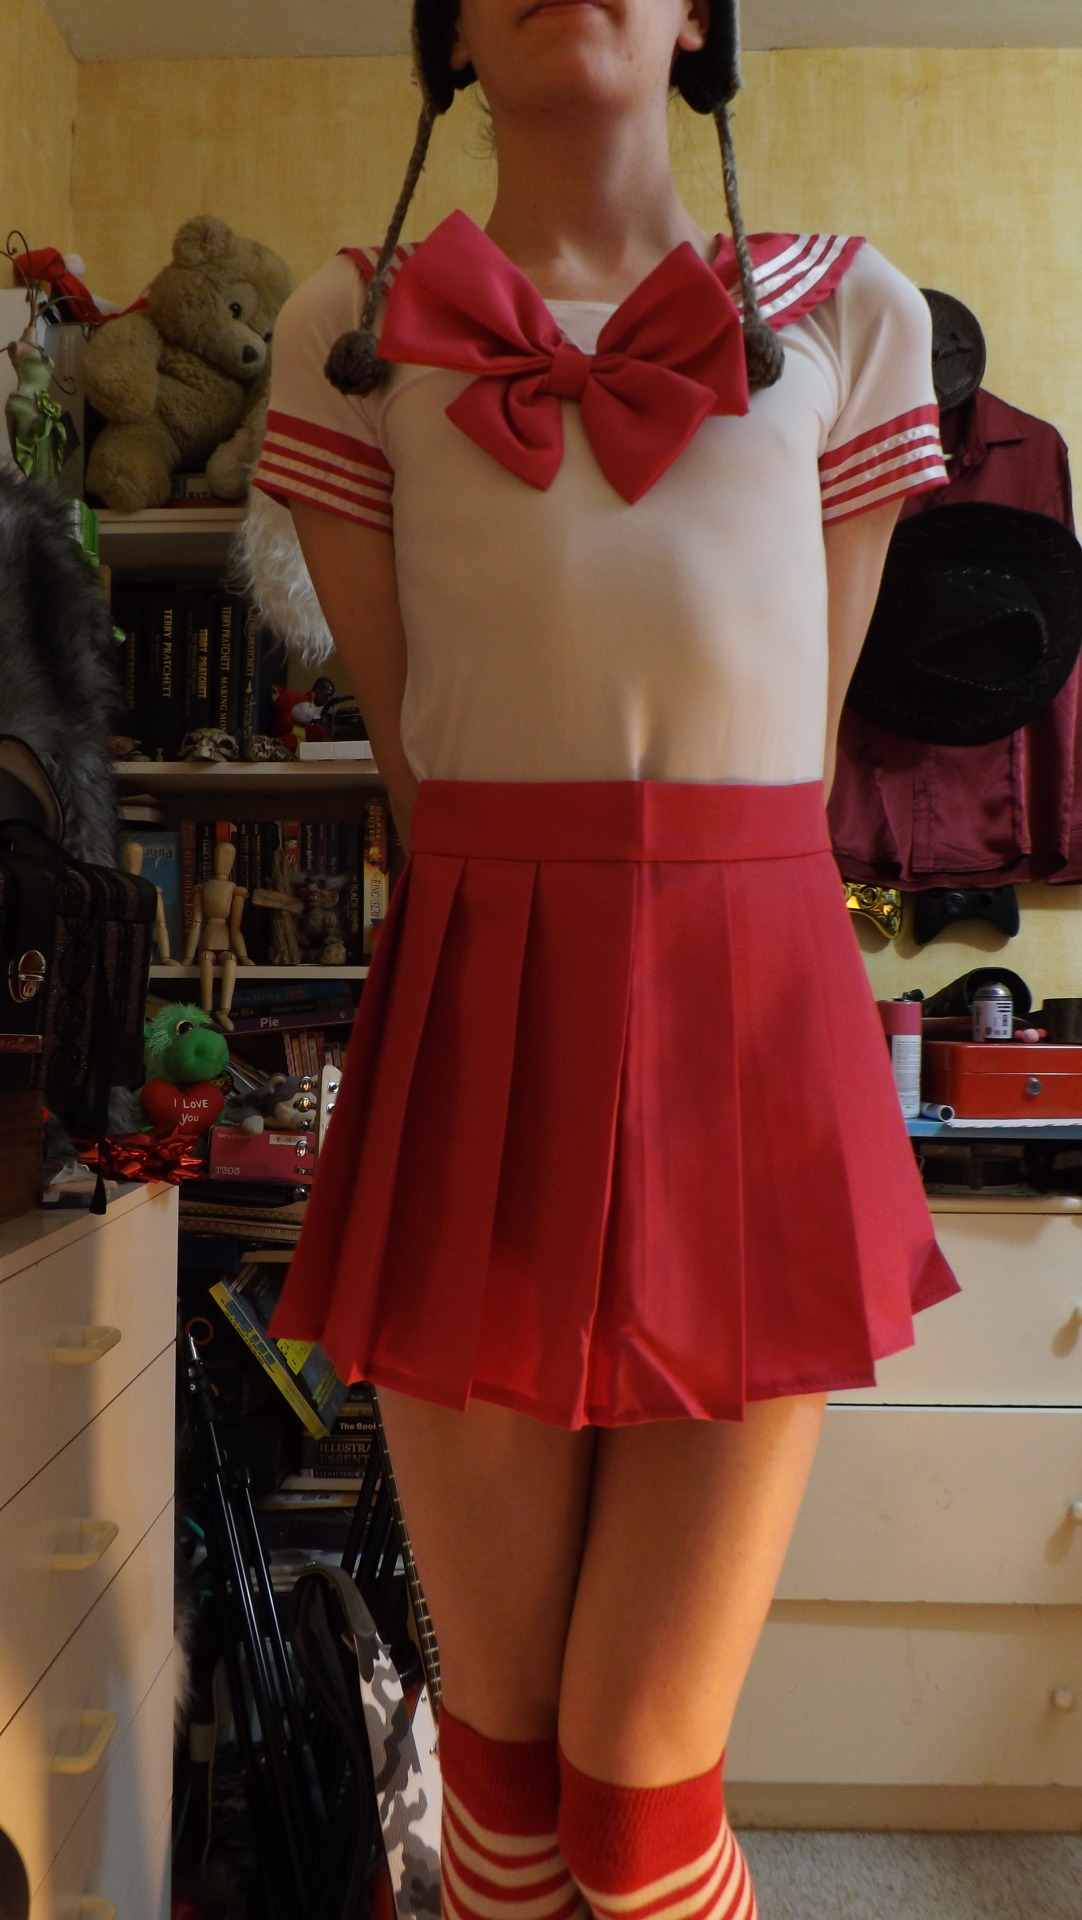 New Schoolgirl Outfit (Part 1)Also, for those of you interested, my tumblr now has